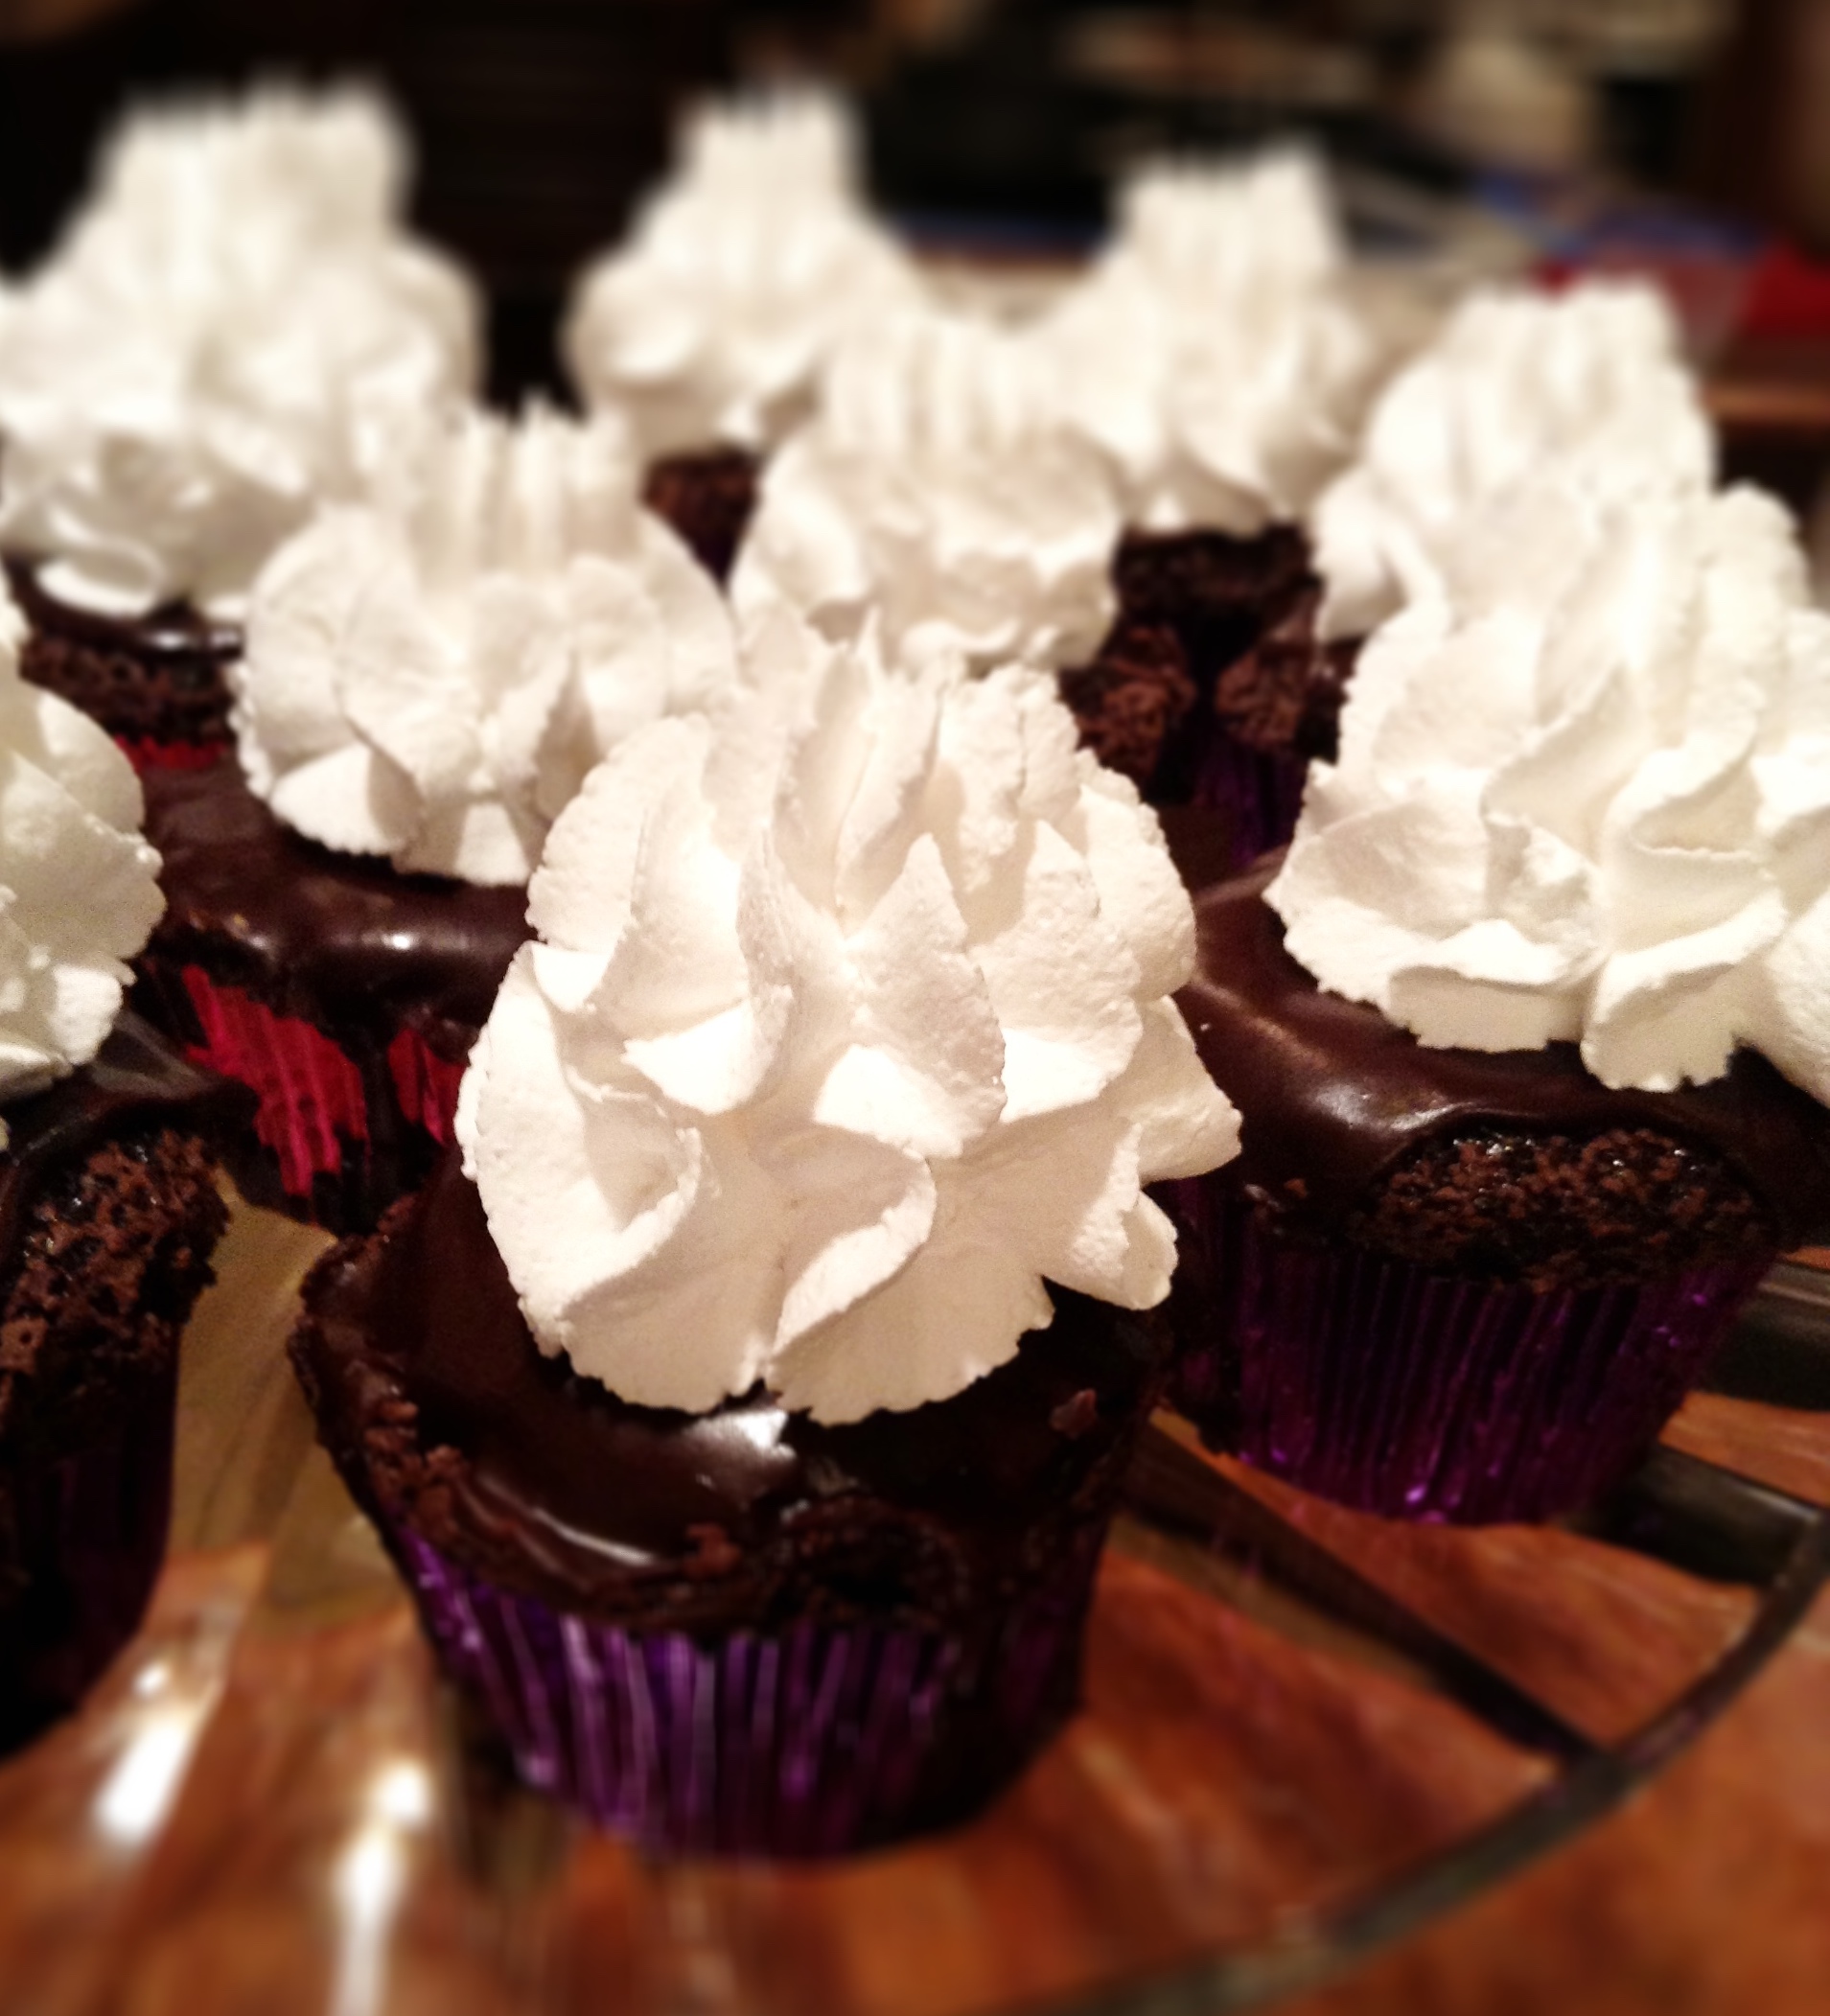 Chocolate Cupcakes with Hard Chocolate Frosting and Whipped Cream